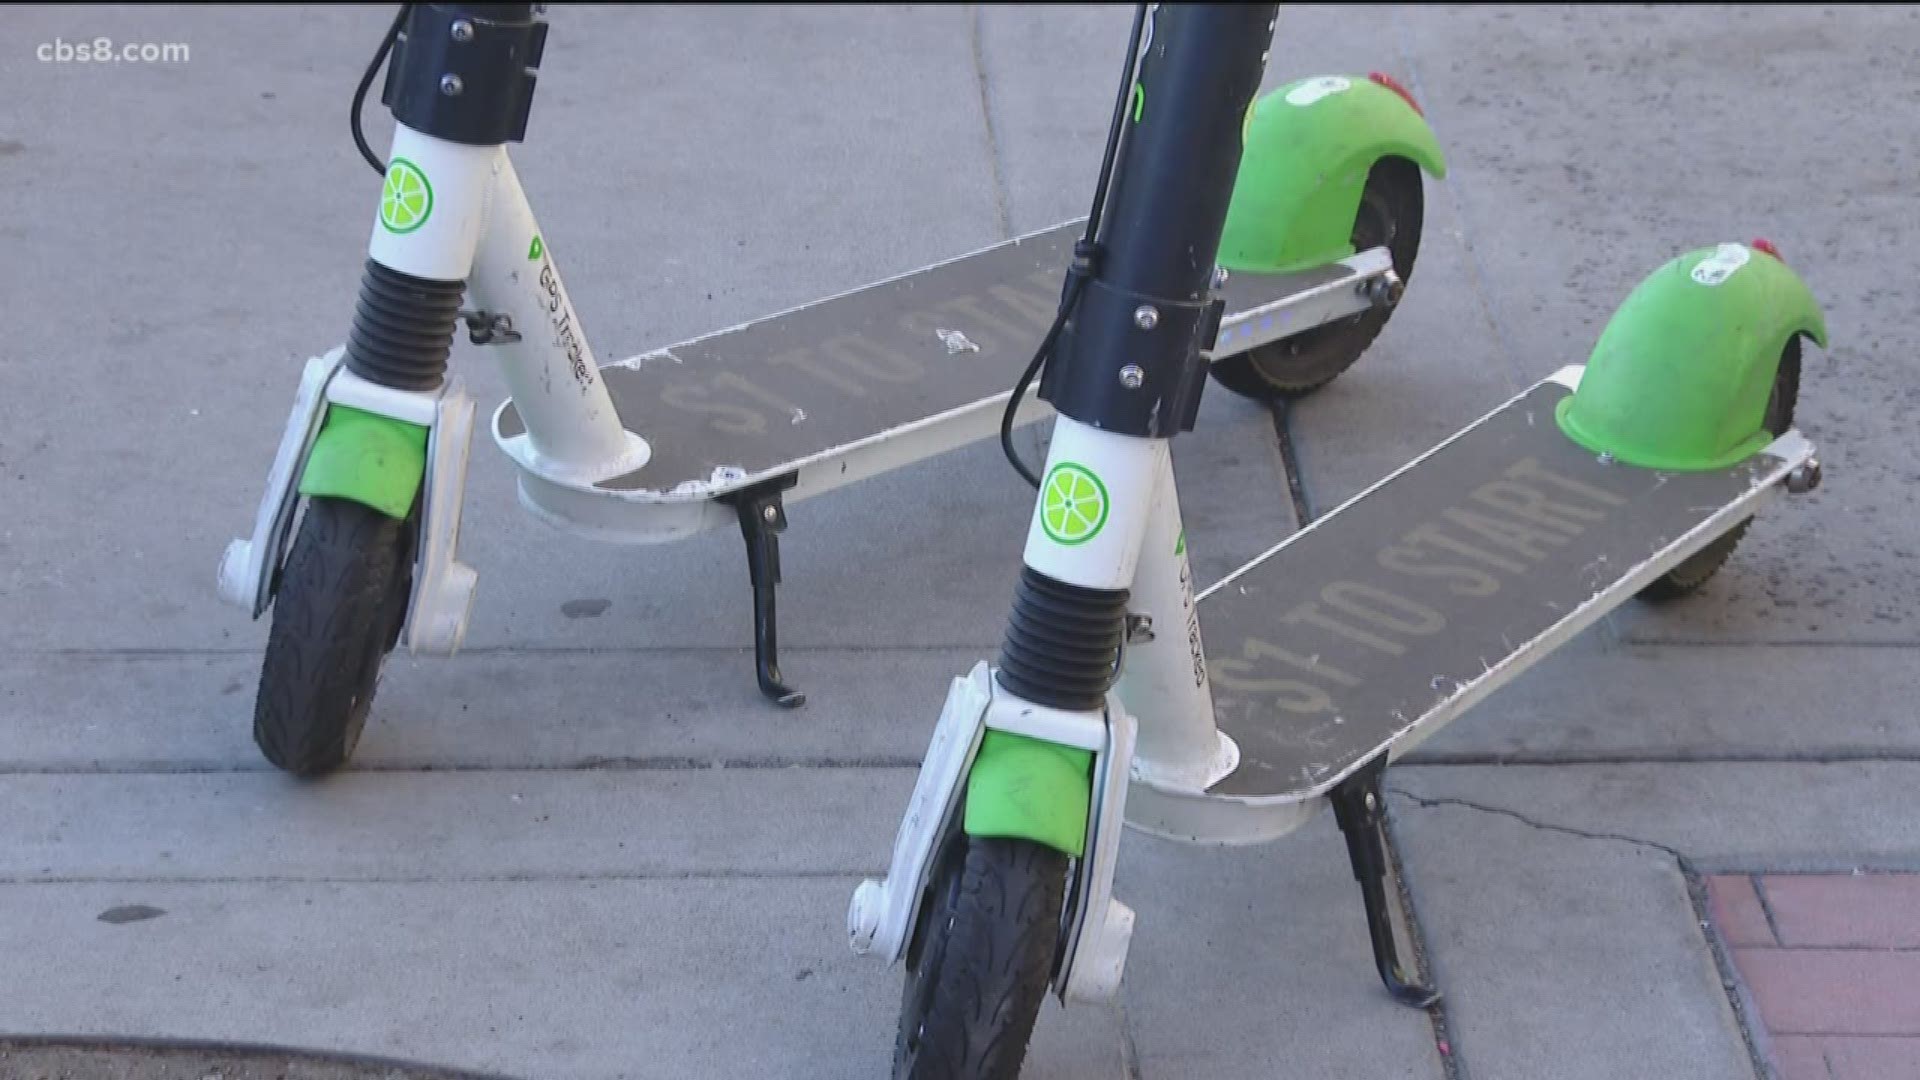 As the City of San Diego continues to go through its growing pains with electric scooters, the City of Chula Vista is welcoming them.